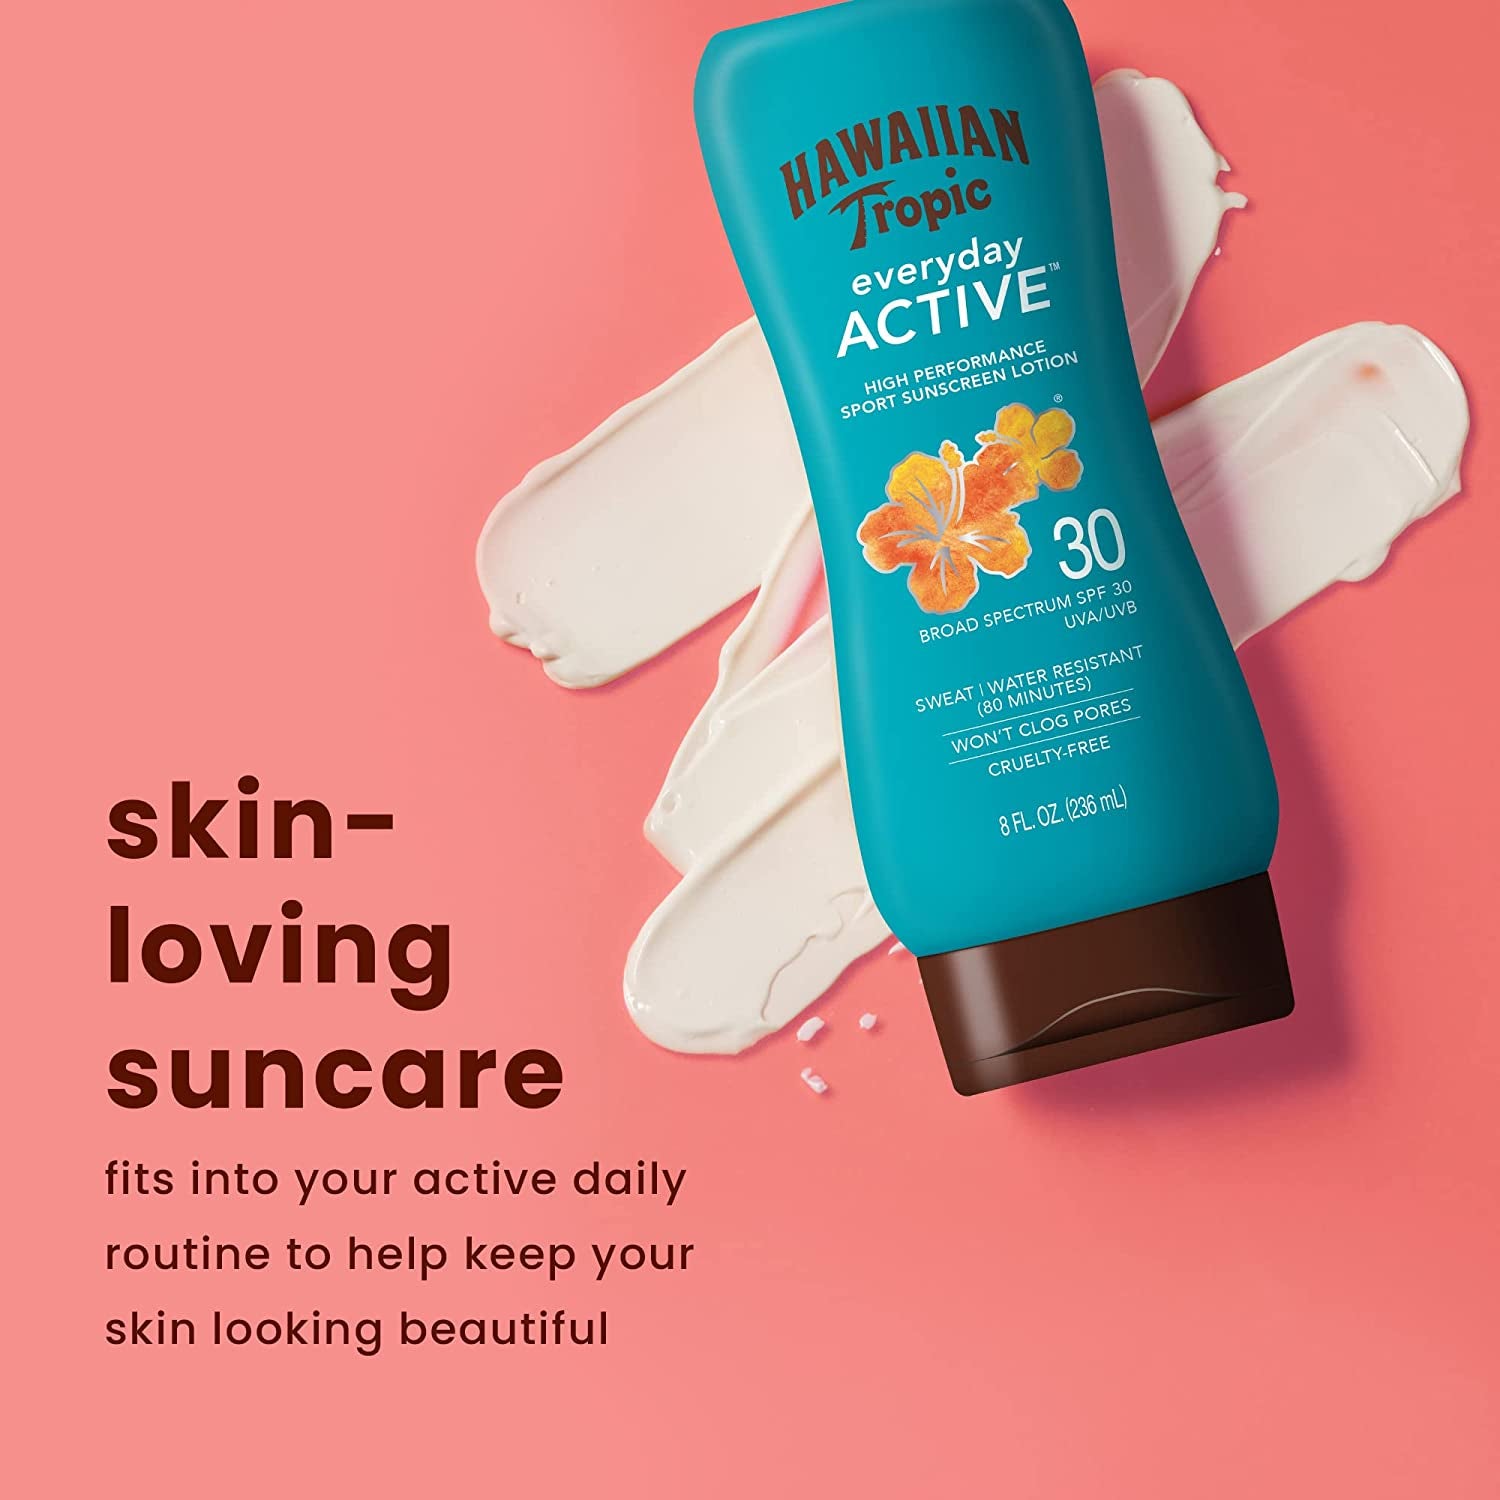 "Sun-Kissed Protection: Hawaiian Tropic SPF 30 Everyday Active Lotion Sunscreen Twin Pack"